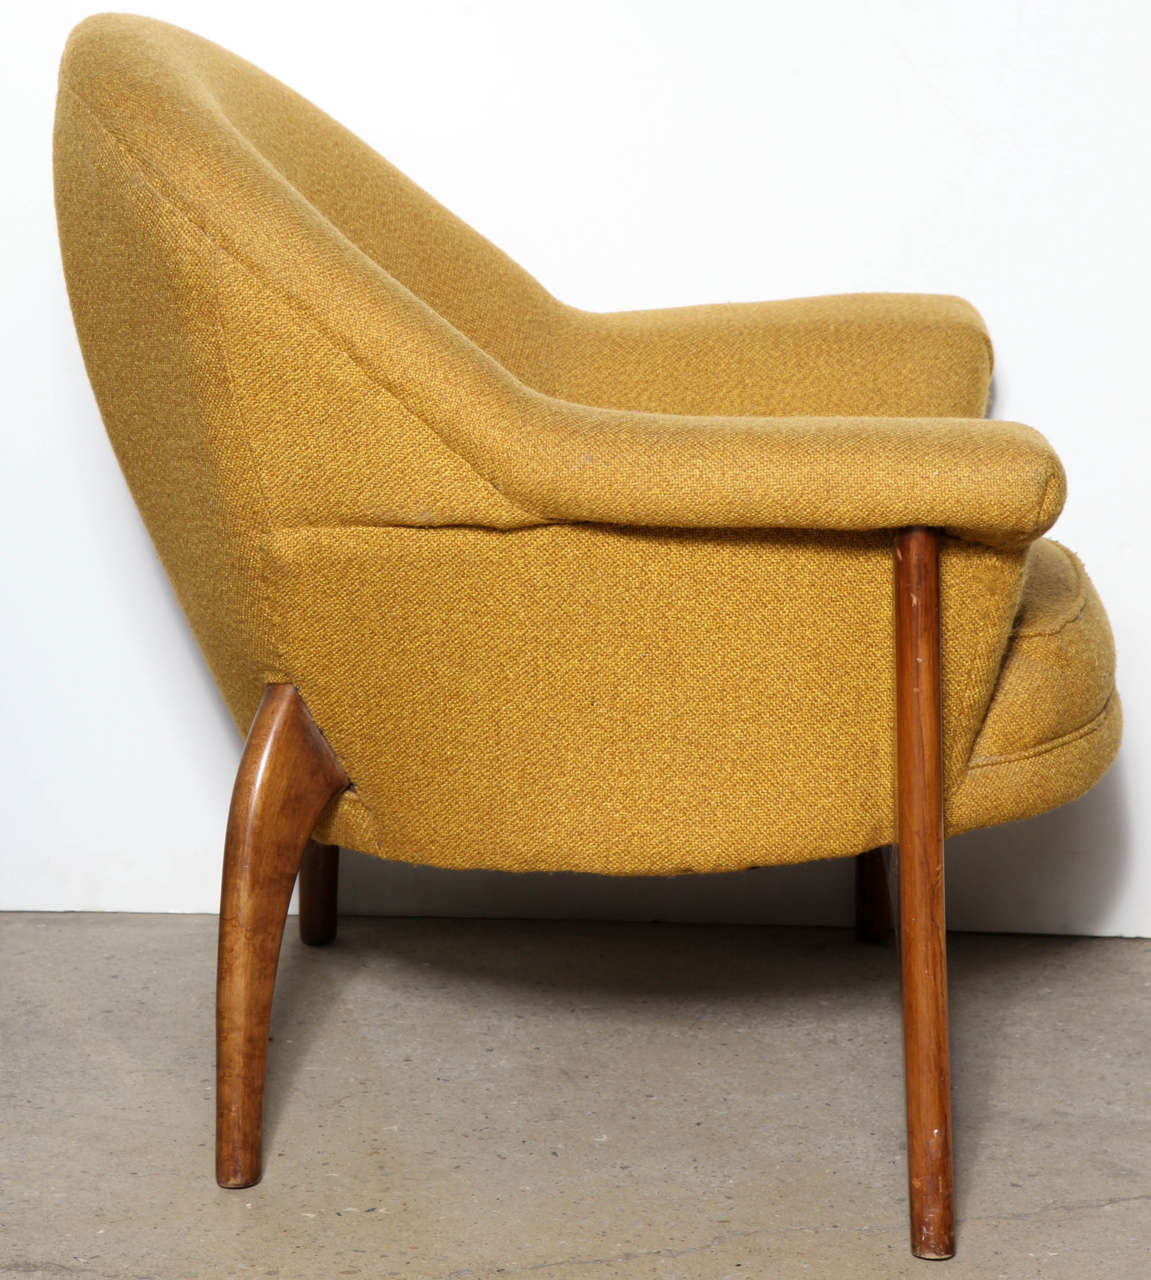 Mid-20th Century Adrian Pearsall for Craft Associates Lounge Chair